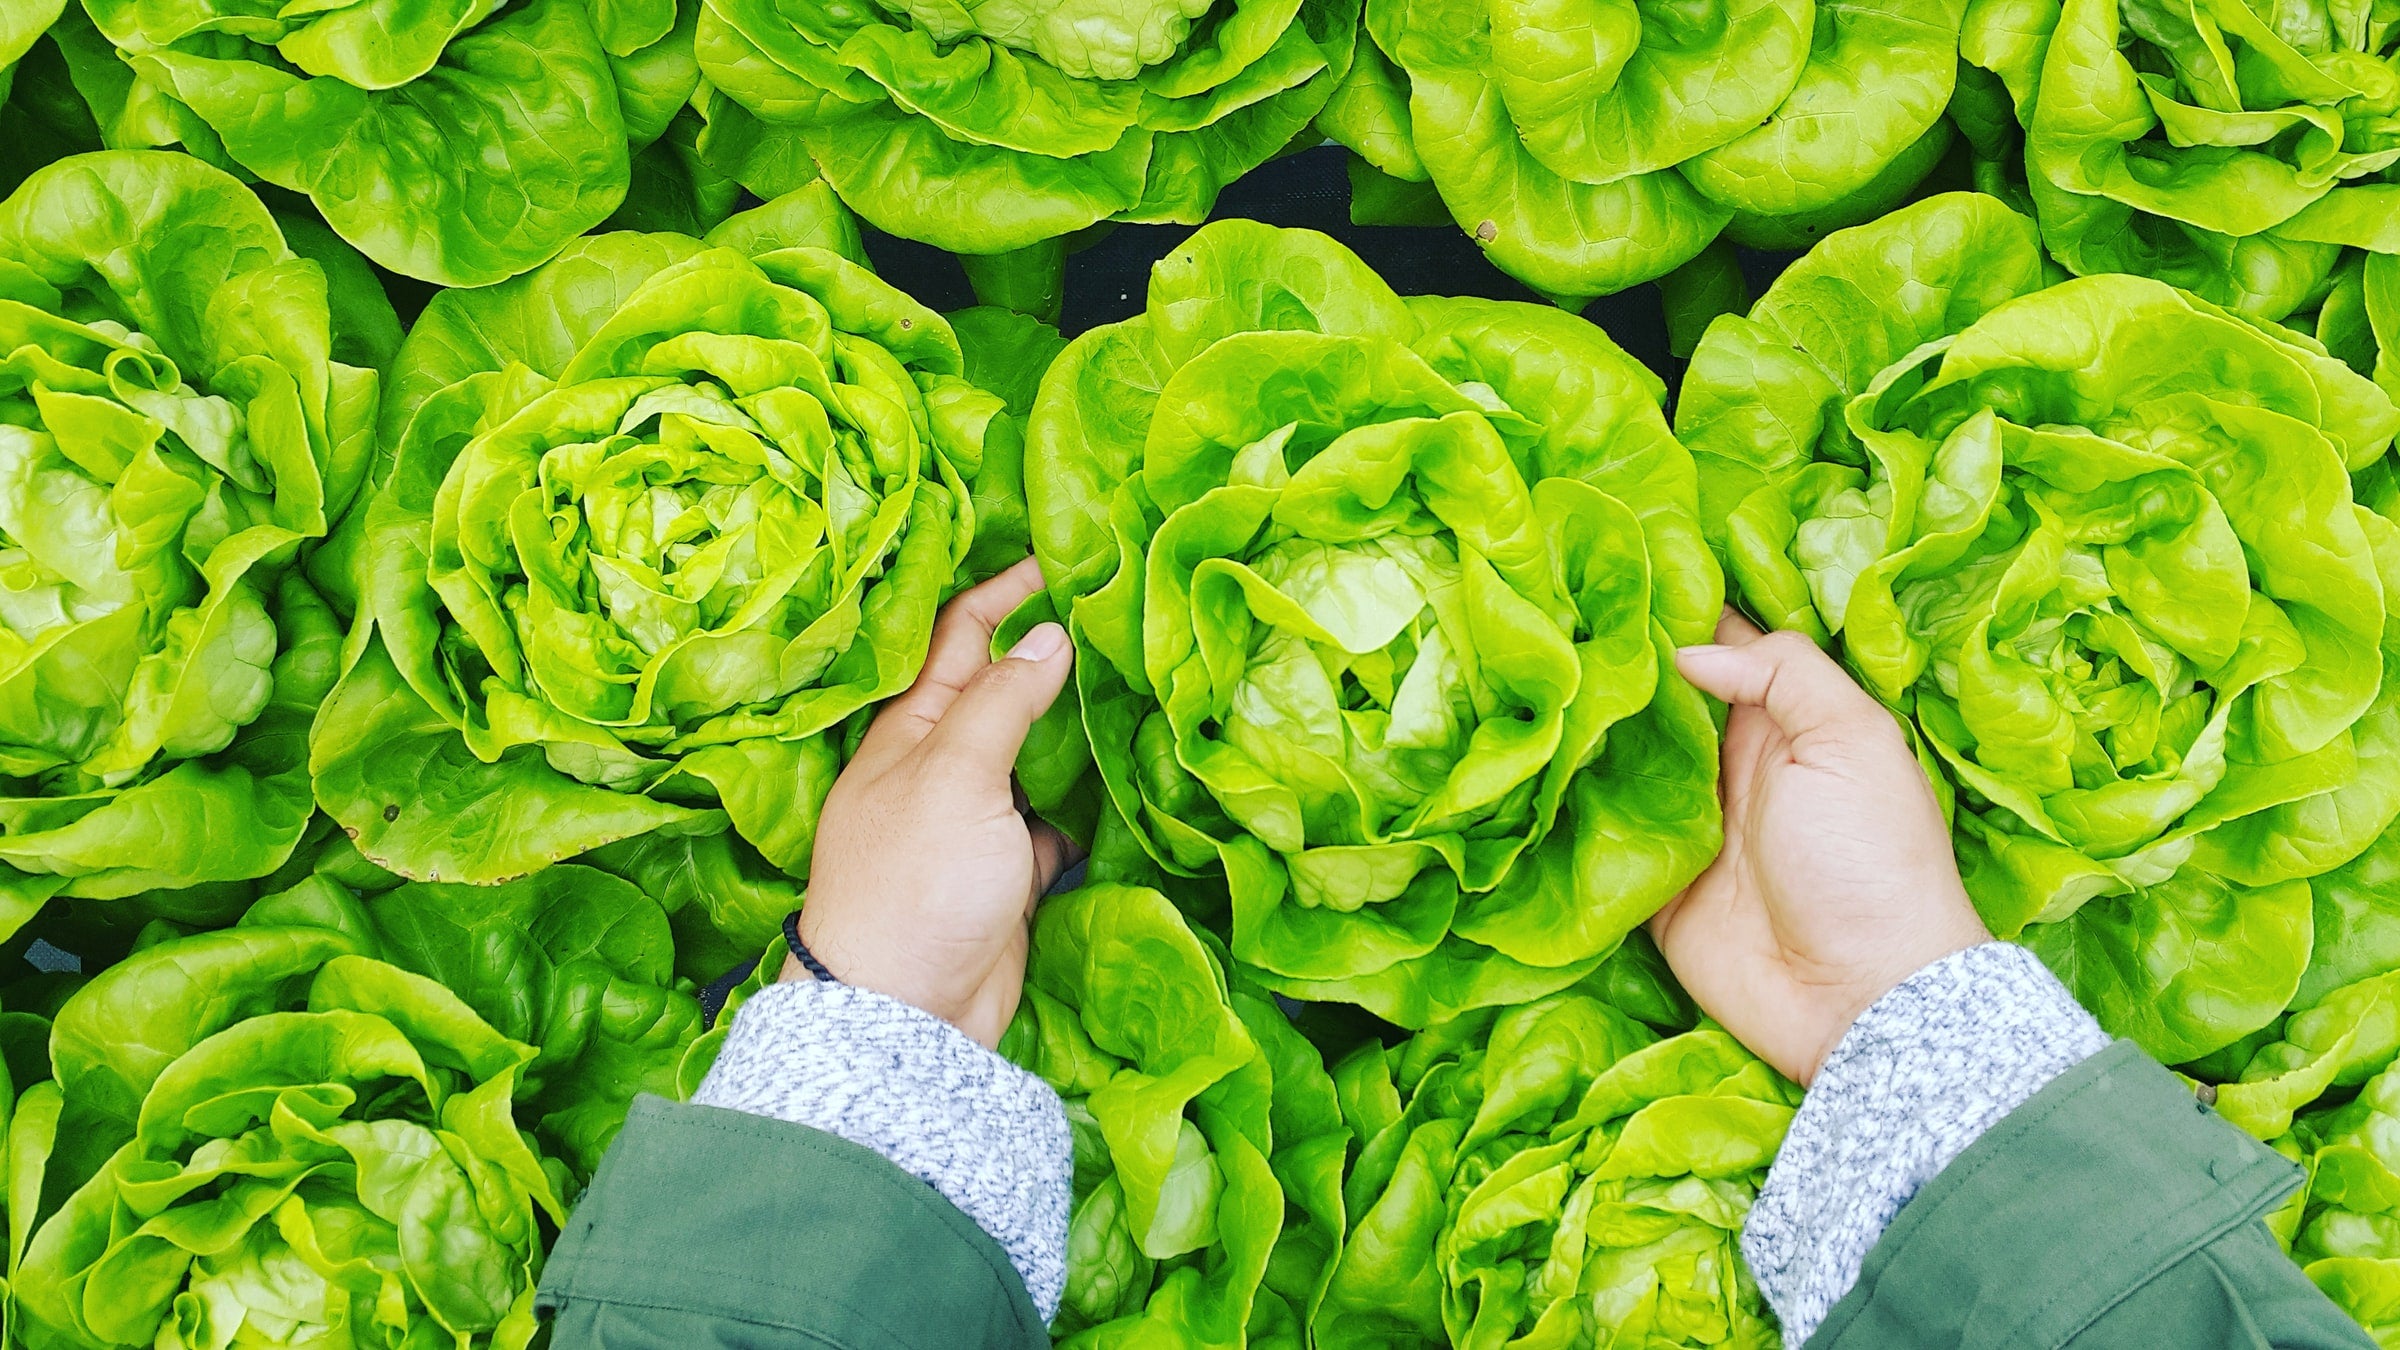 6 Types of Lettuce to Spice Up Your Salads